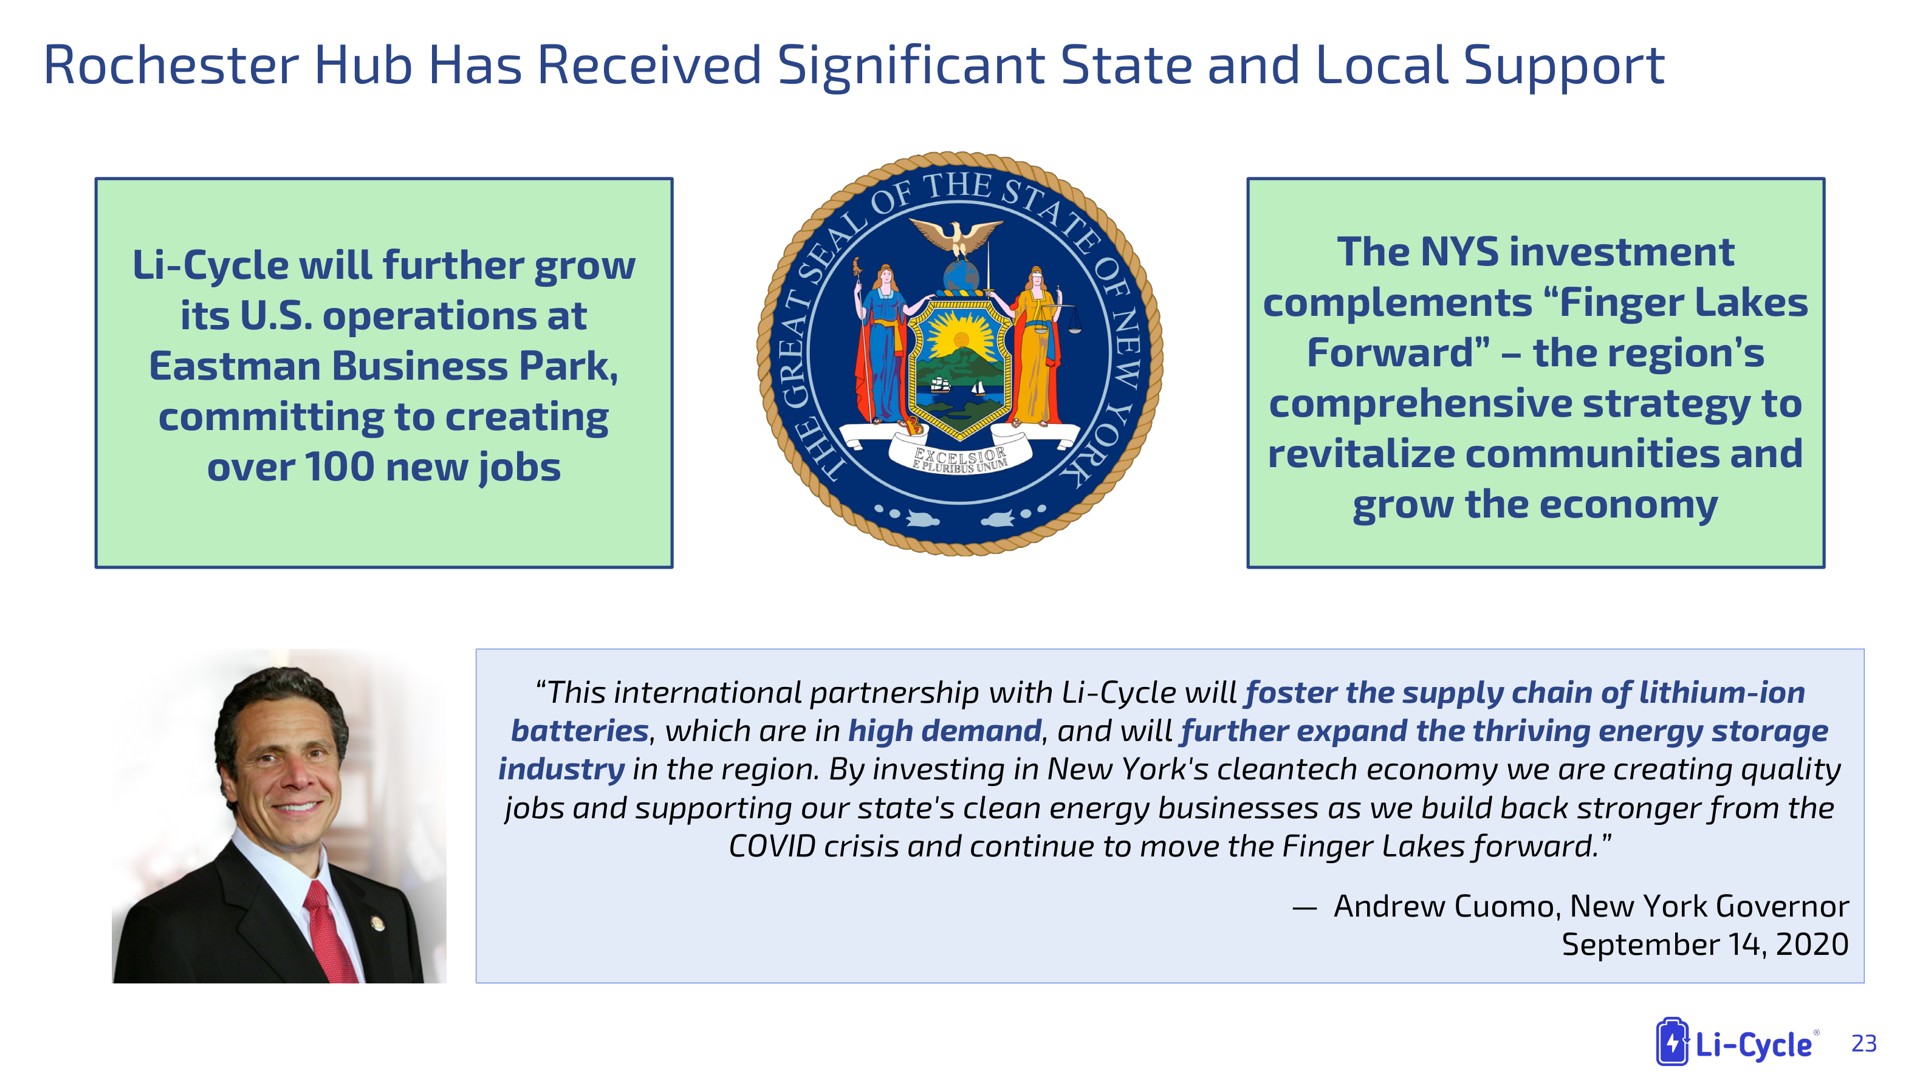 hub has received significant state and local support cycle will further grow its operations at business park committing to creating over new jobs the investment complements finger lakes forward the region comprehensive strategy to revitalize communities and grow the economy a cee | Li-Cycle